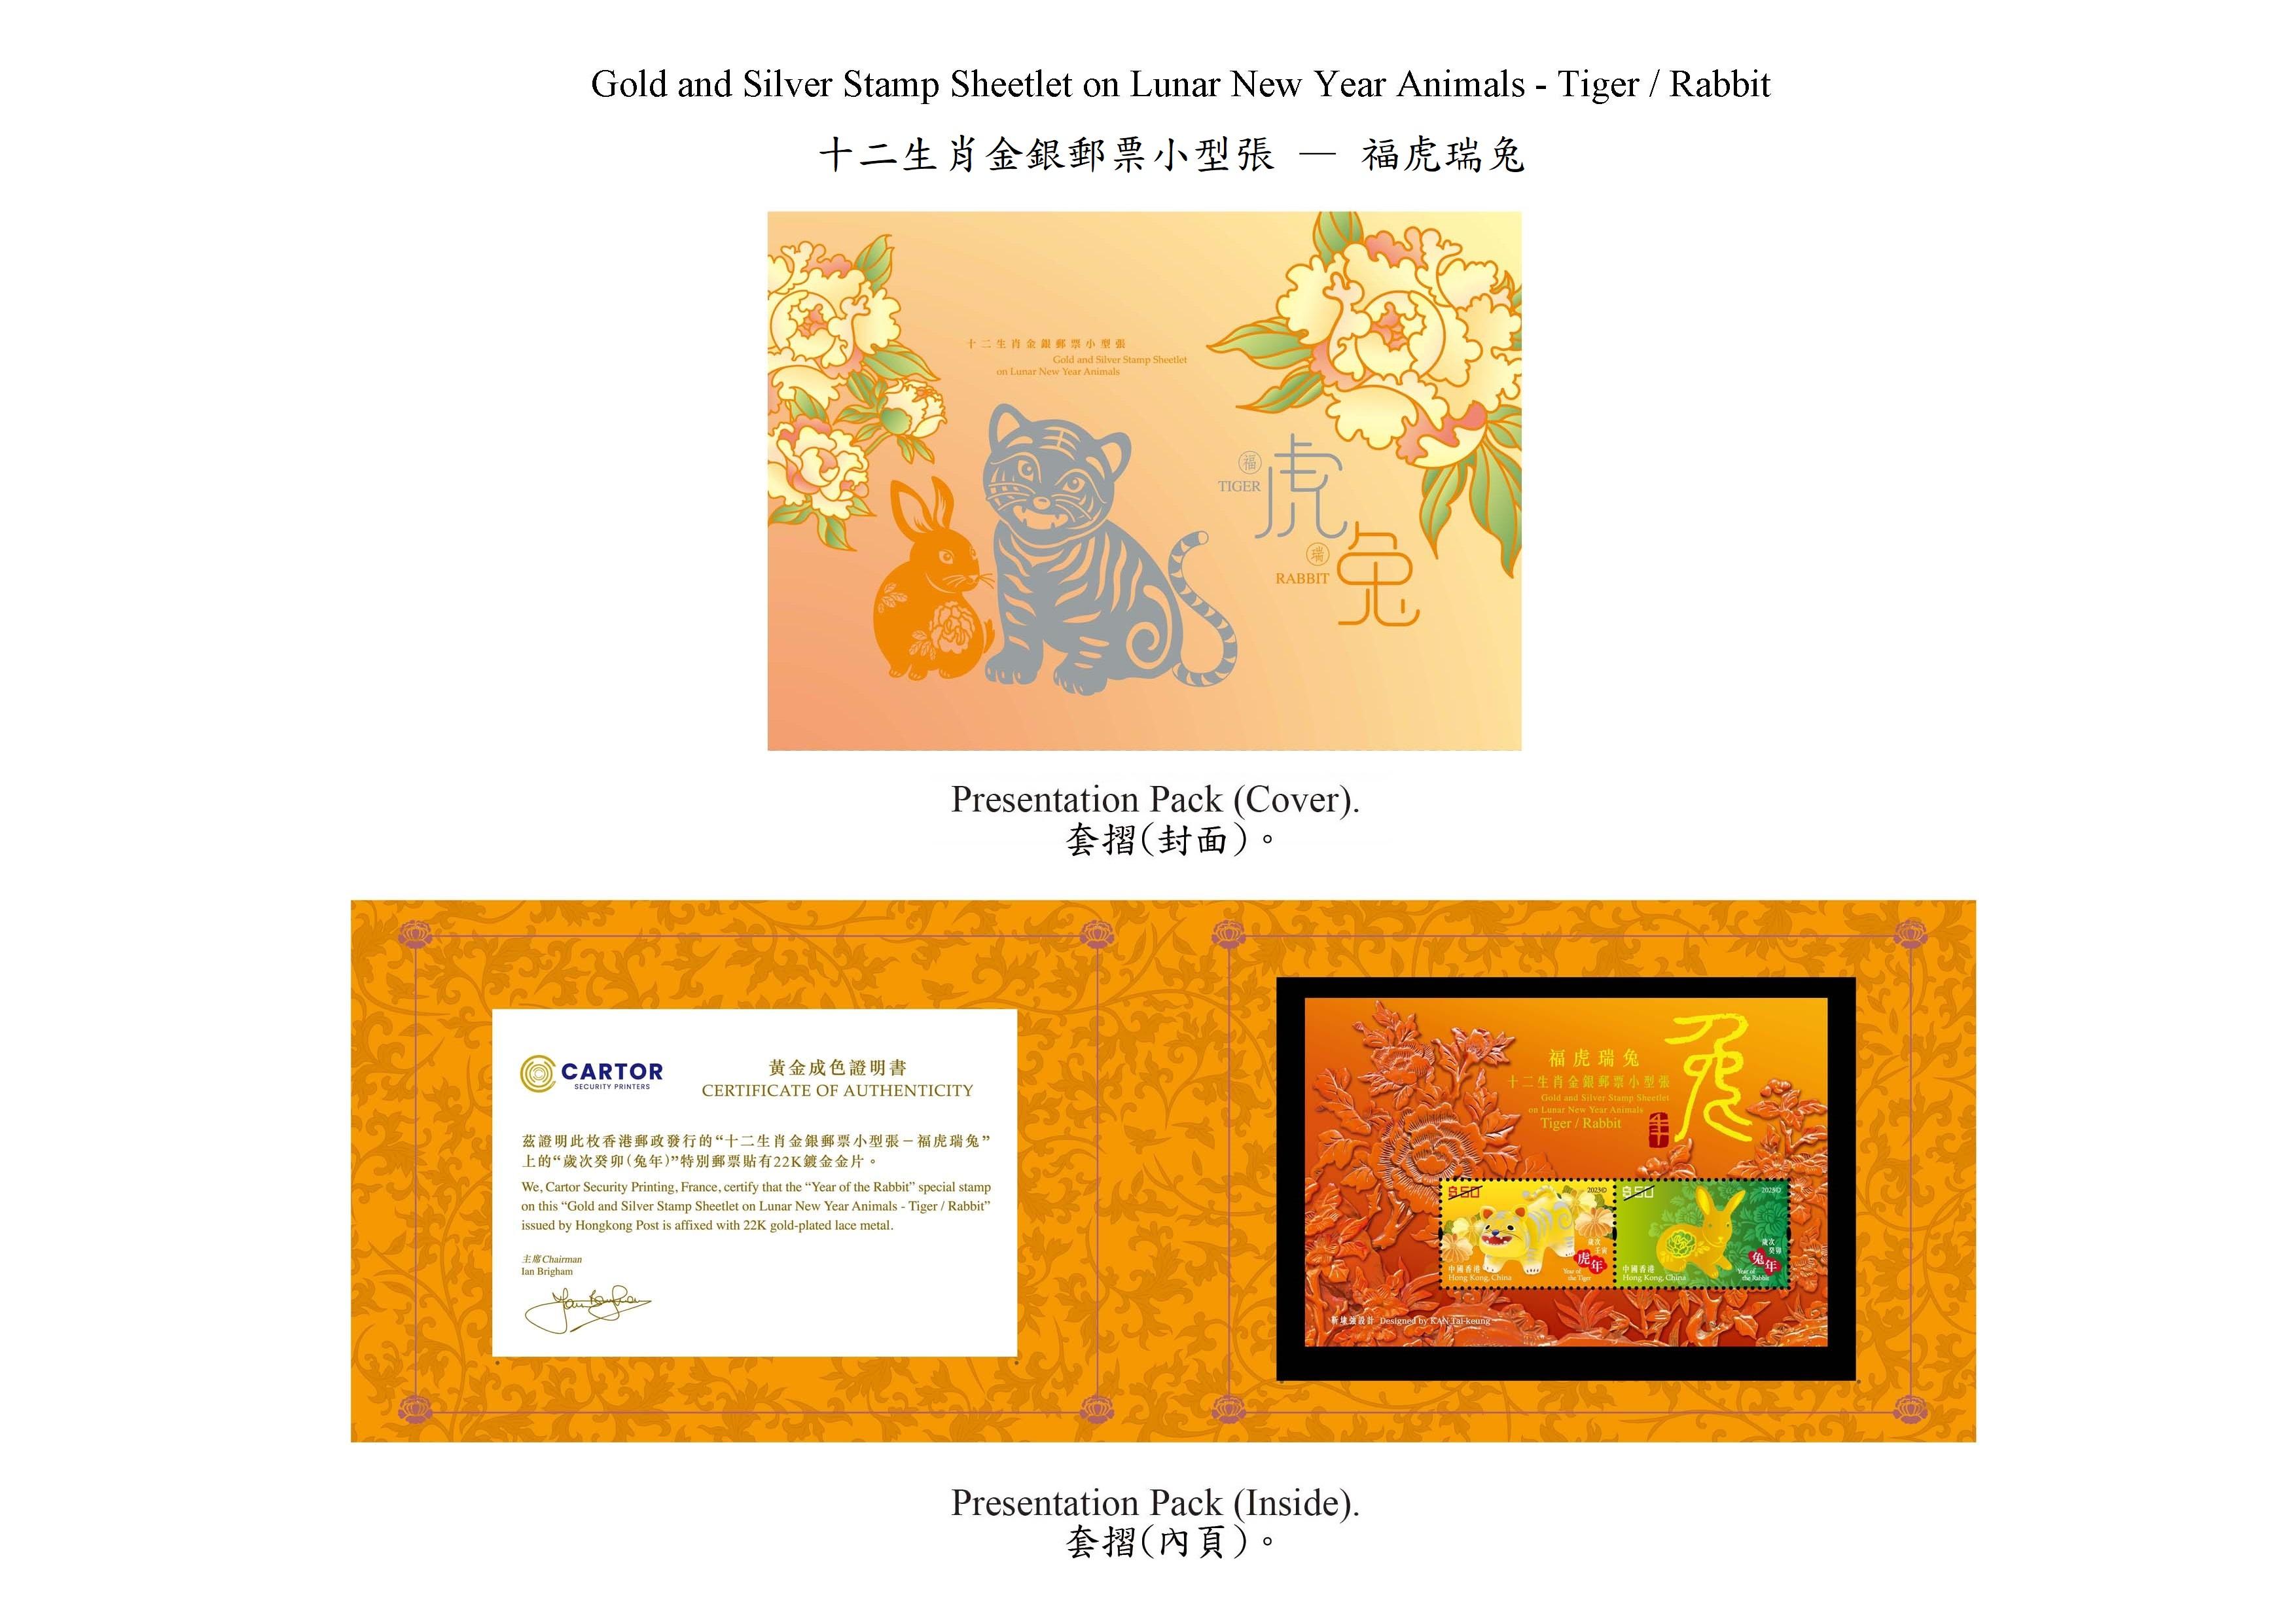 Hongkong Post will launch a special stamp issue and associated philatelic products with the theme "Year of the Rabbit" on January 10, 2023 (Tuesday). The "Gold and Silver Stamp Sheetlet on Lunar New Year Animals - Ox/Tiger" will also be launched on the same day. Photo shows the presentation pack.
